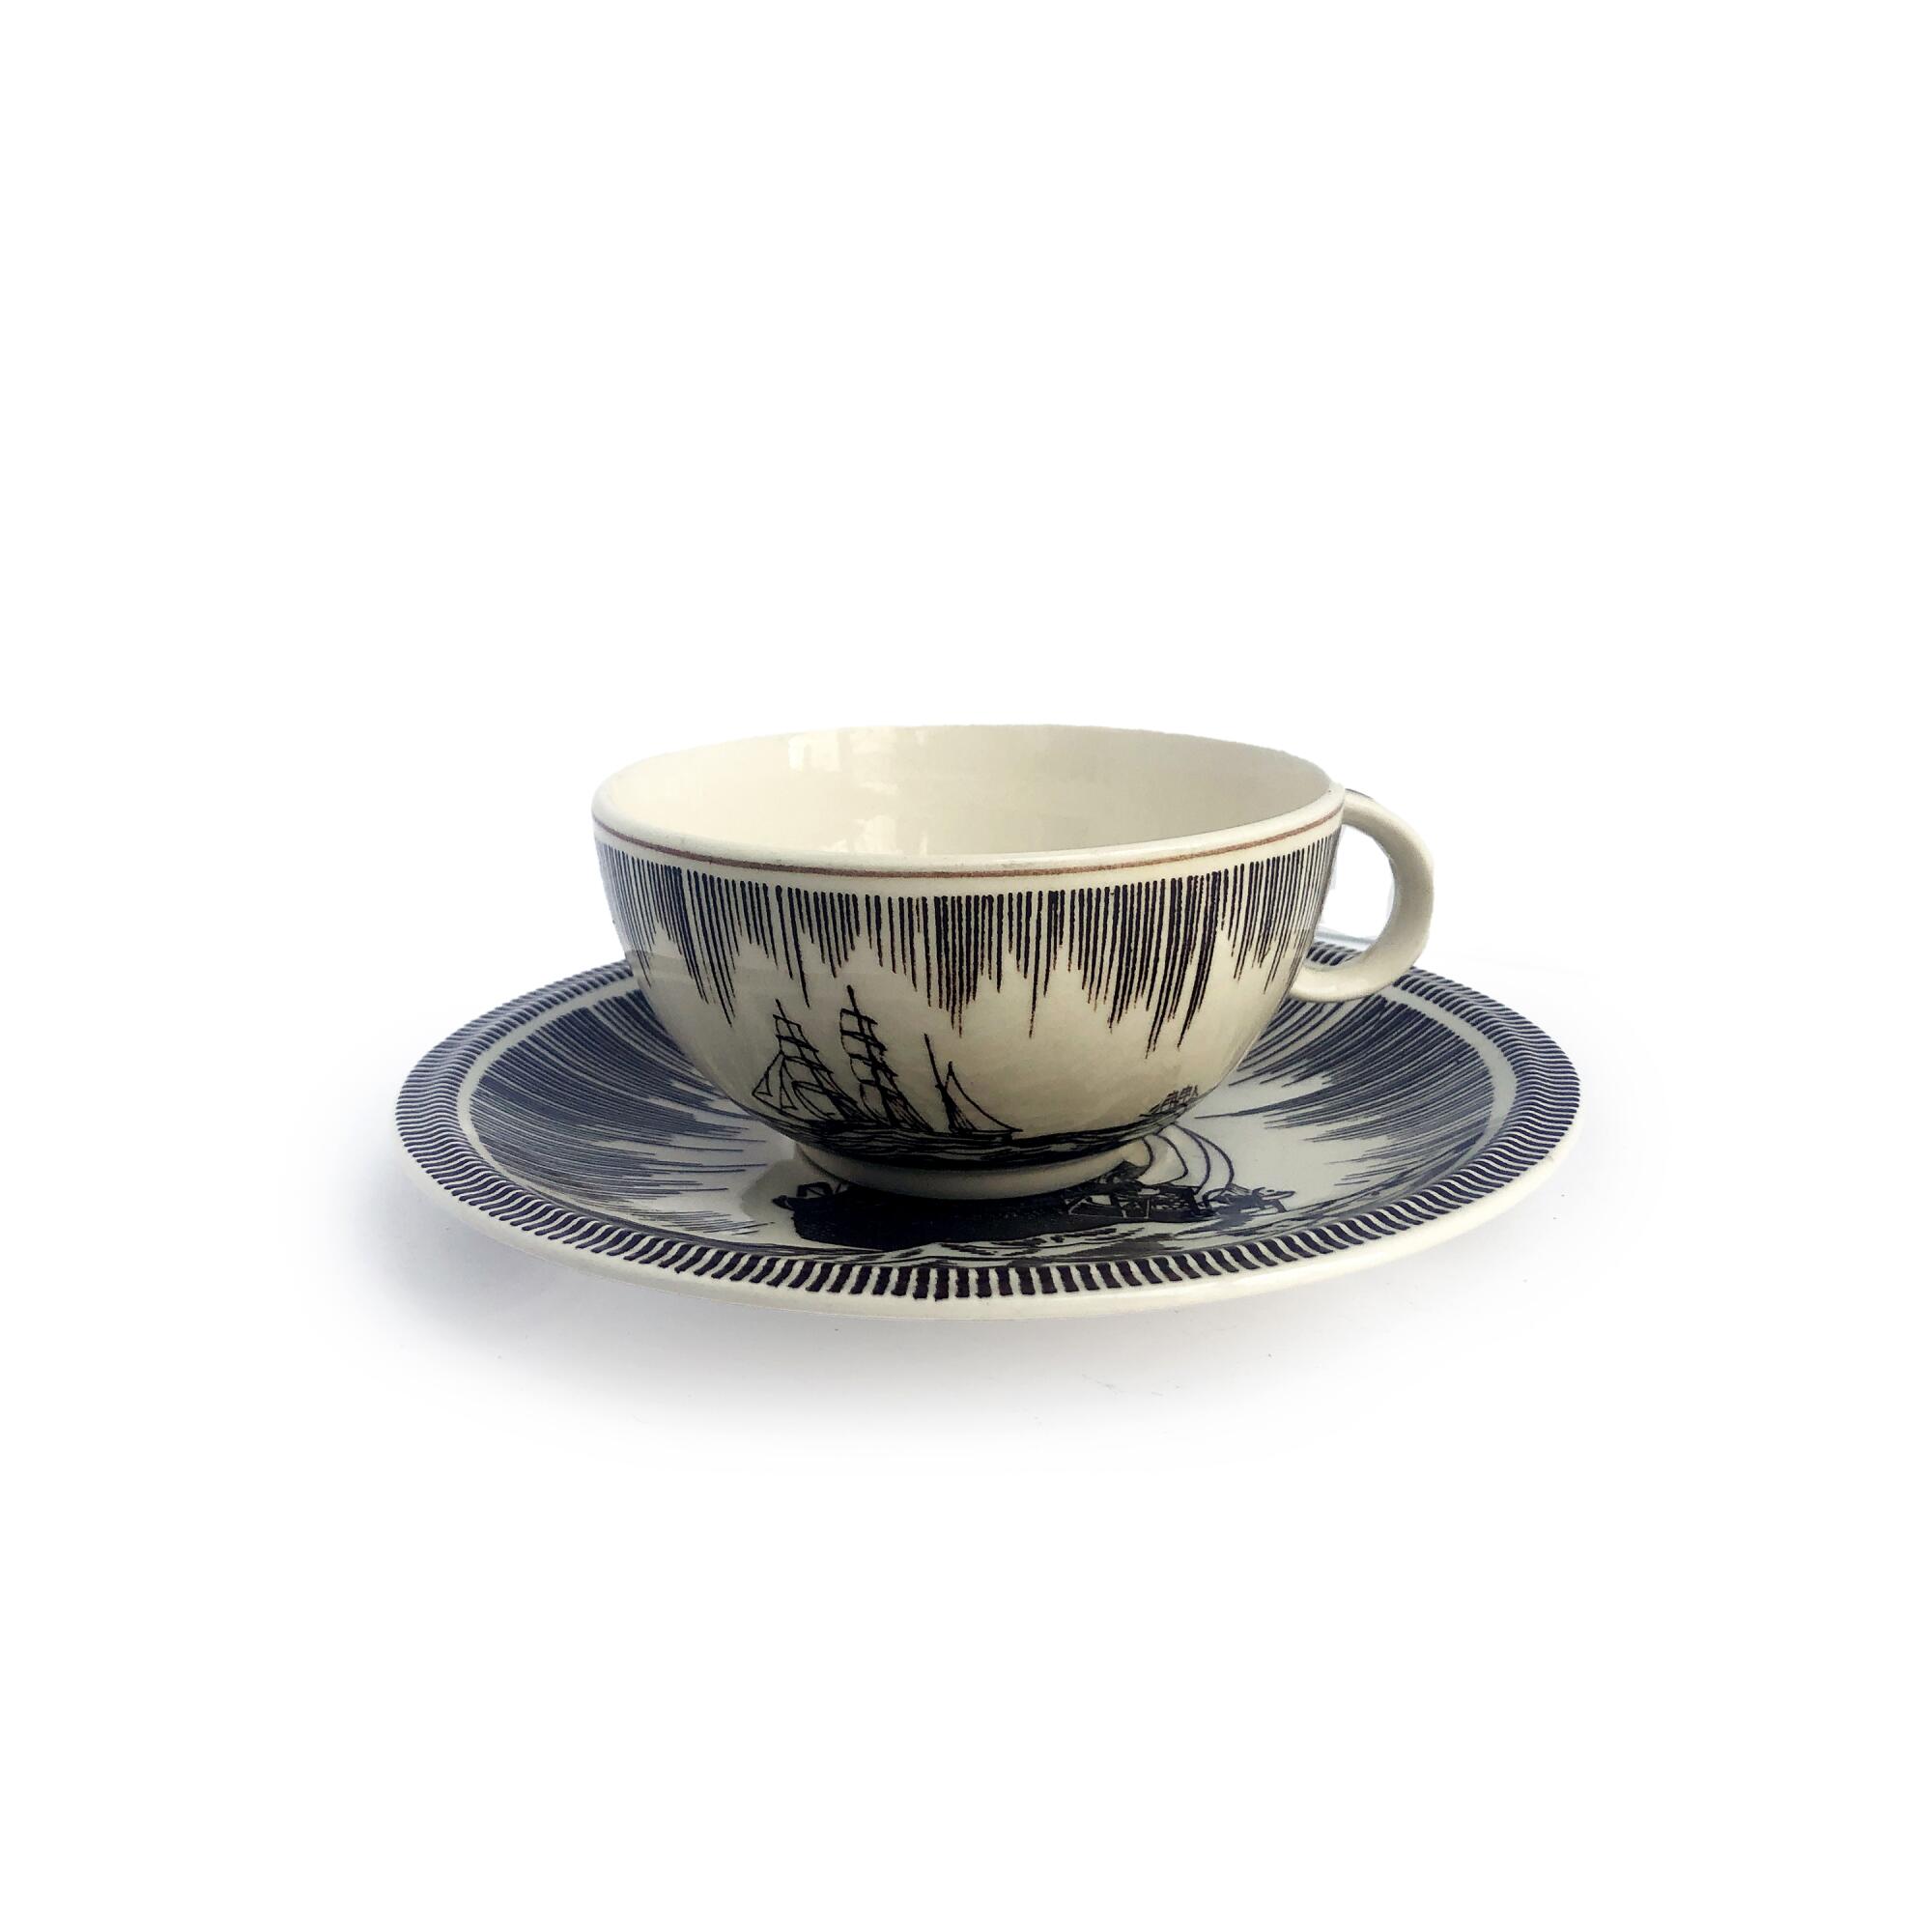 A teacup and saucer with a black and white design